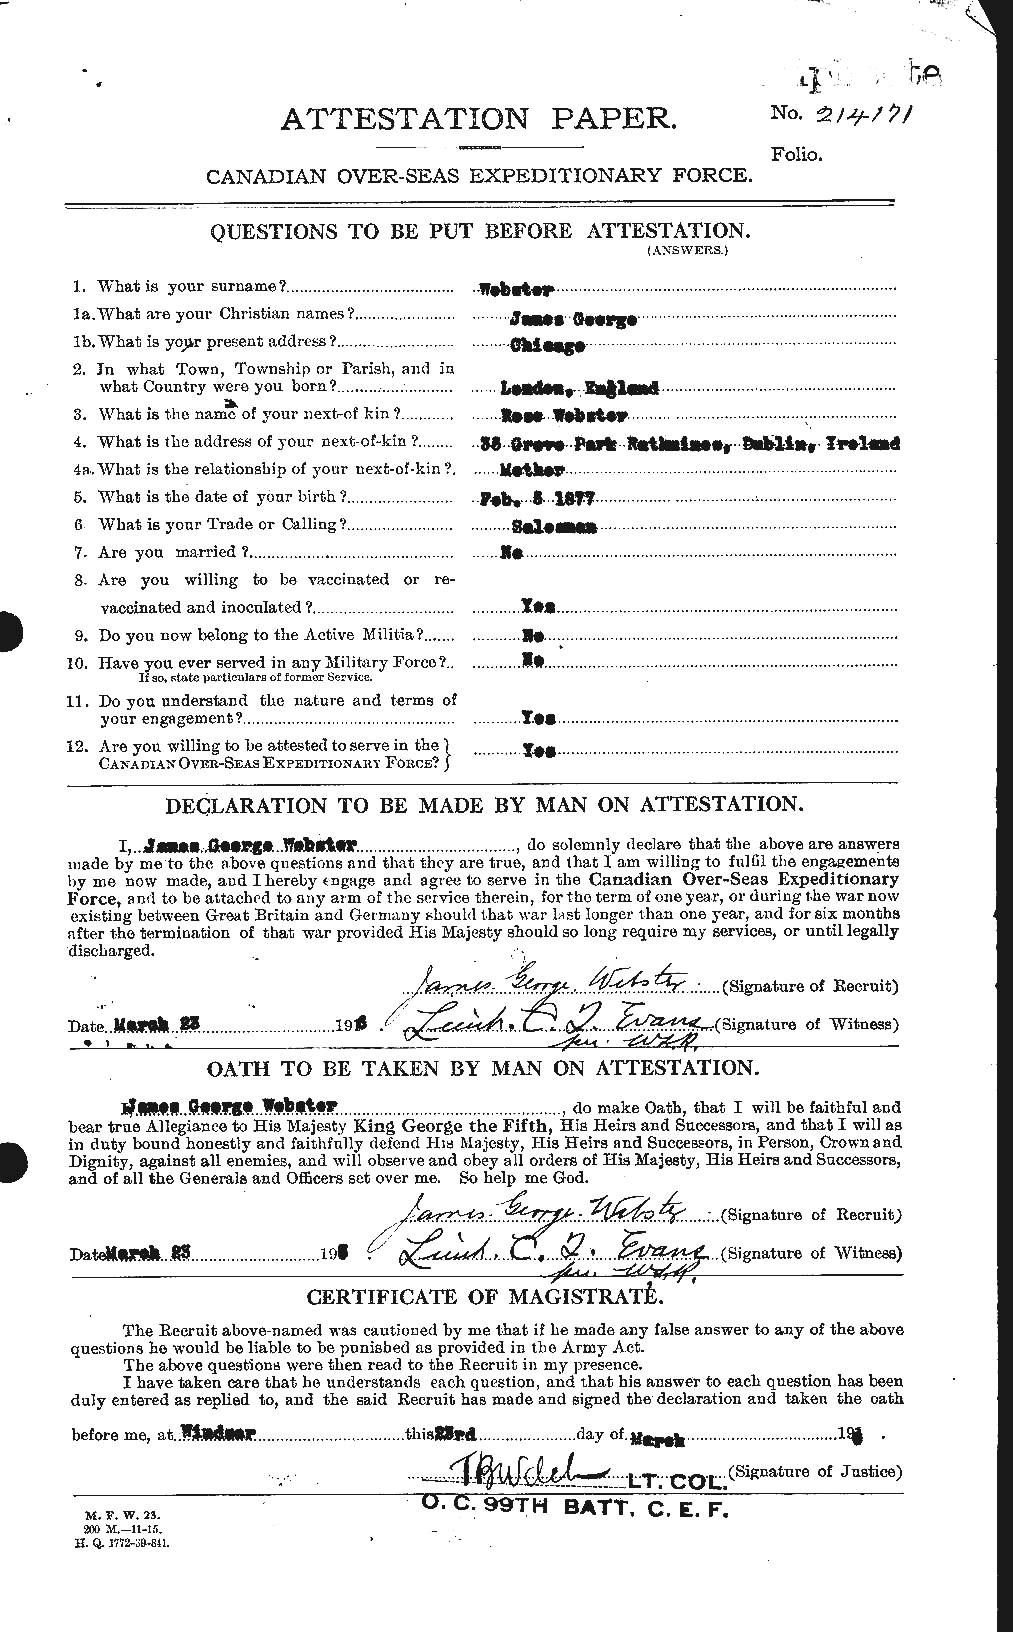 Personnel Records of the First World War - CEF 670459a